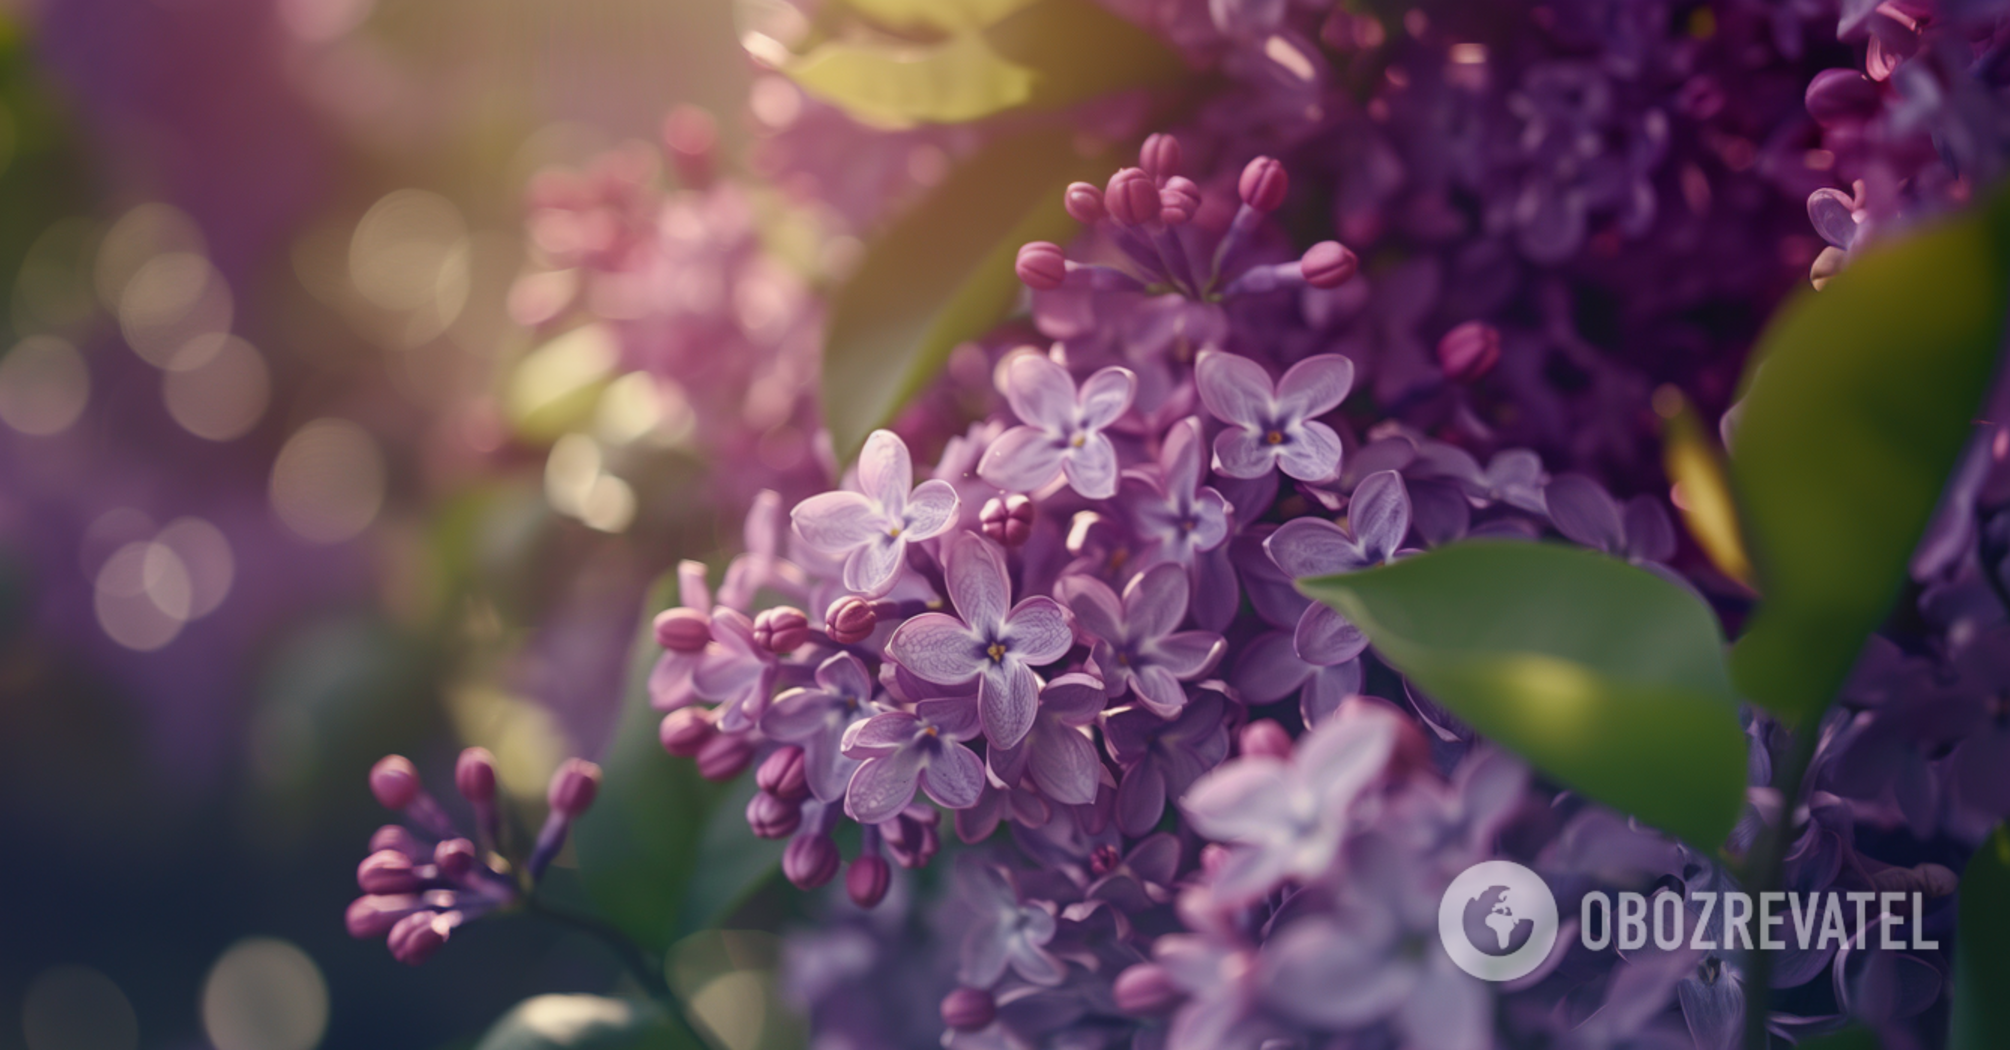 How to grow lilacs in your own garden from a cutting: simple instructions